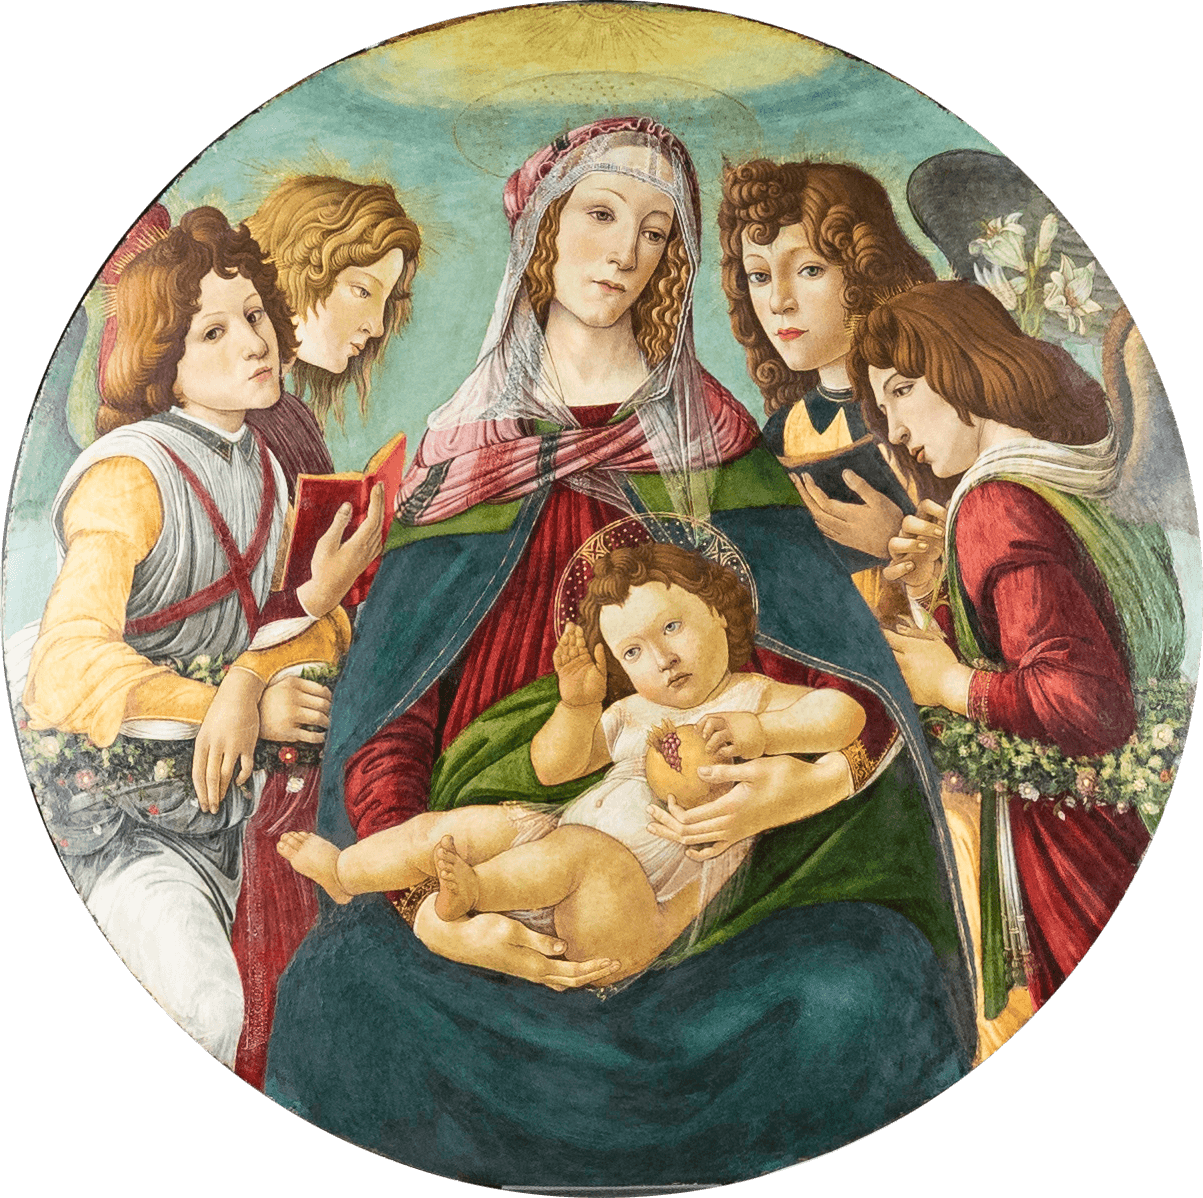 Madonna of the Pomegranate, by the studio of Botticelli